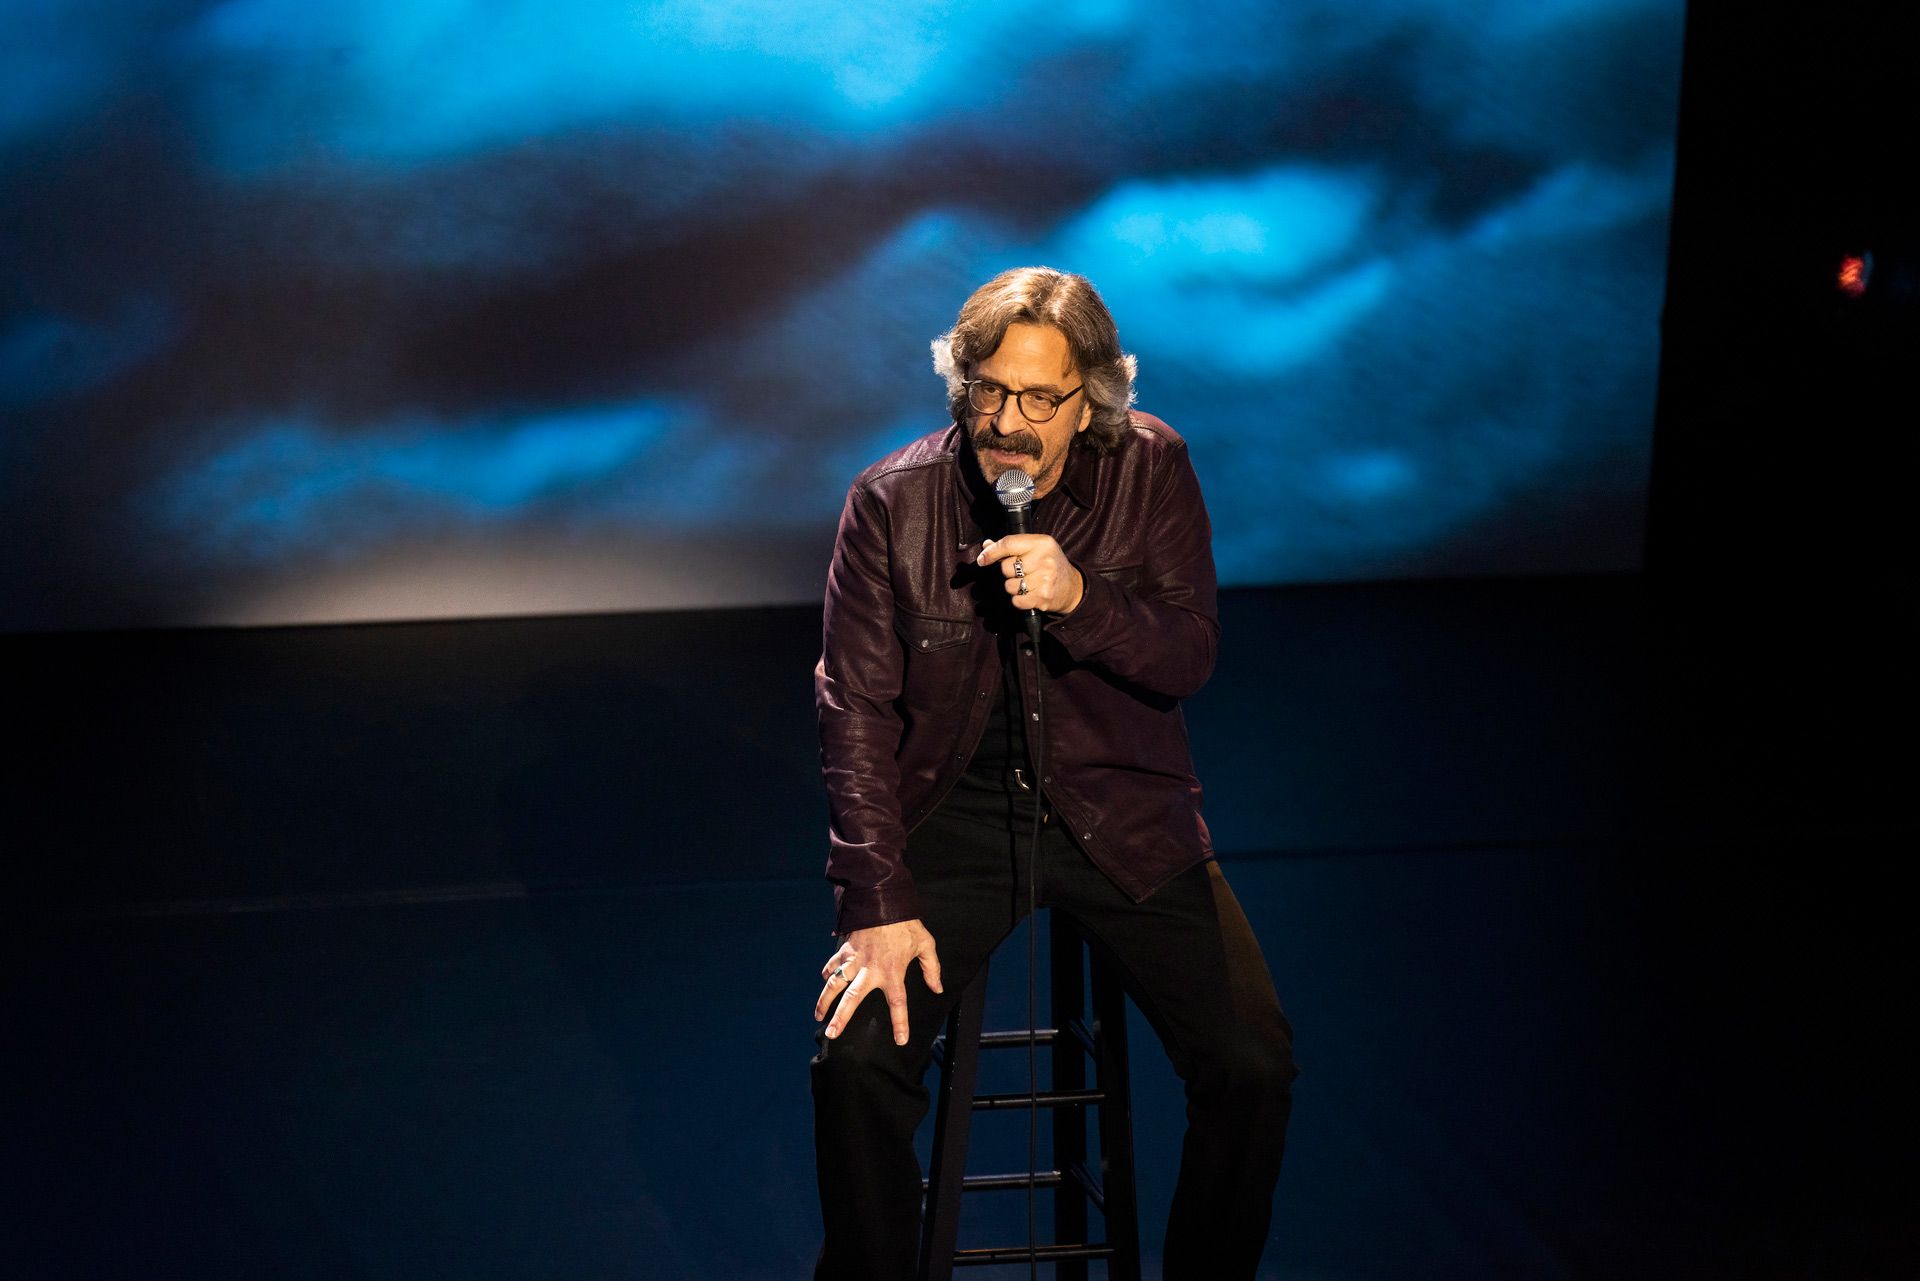 Review: Marc Maron 'From Bleak to Dark' HBO Comedy Special